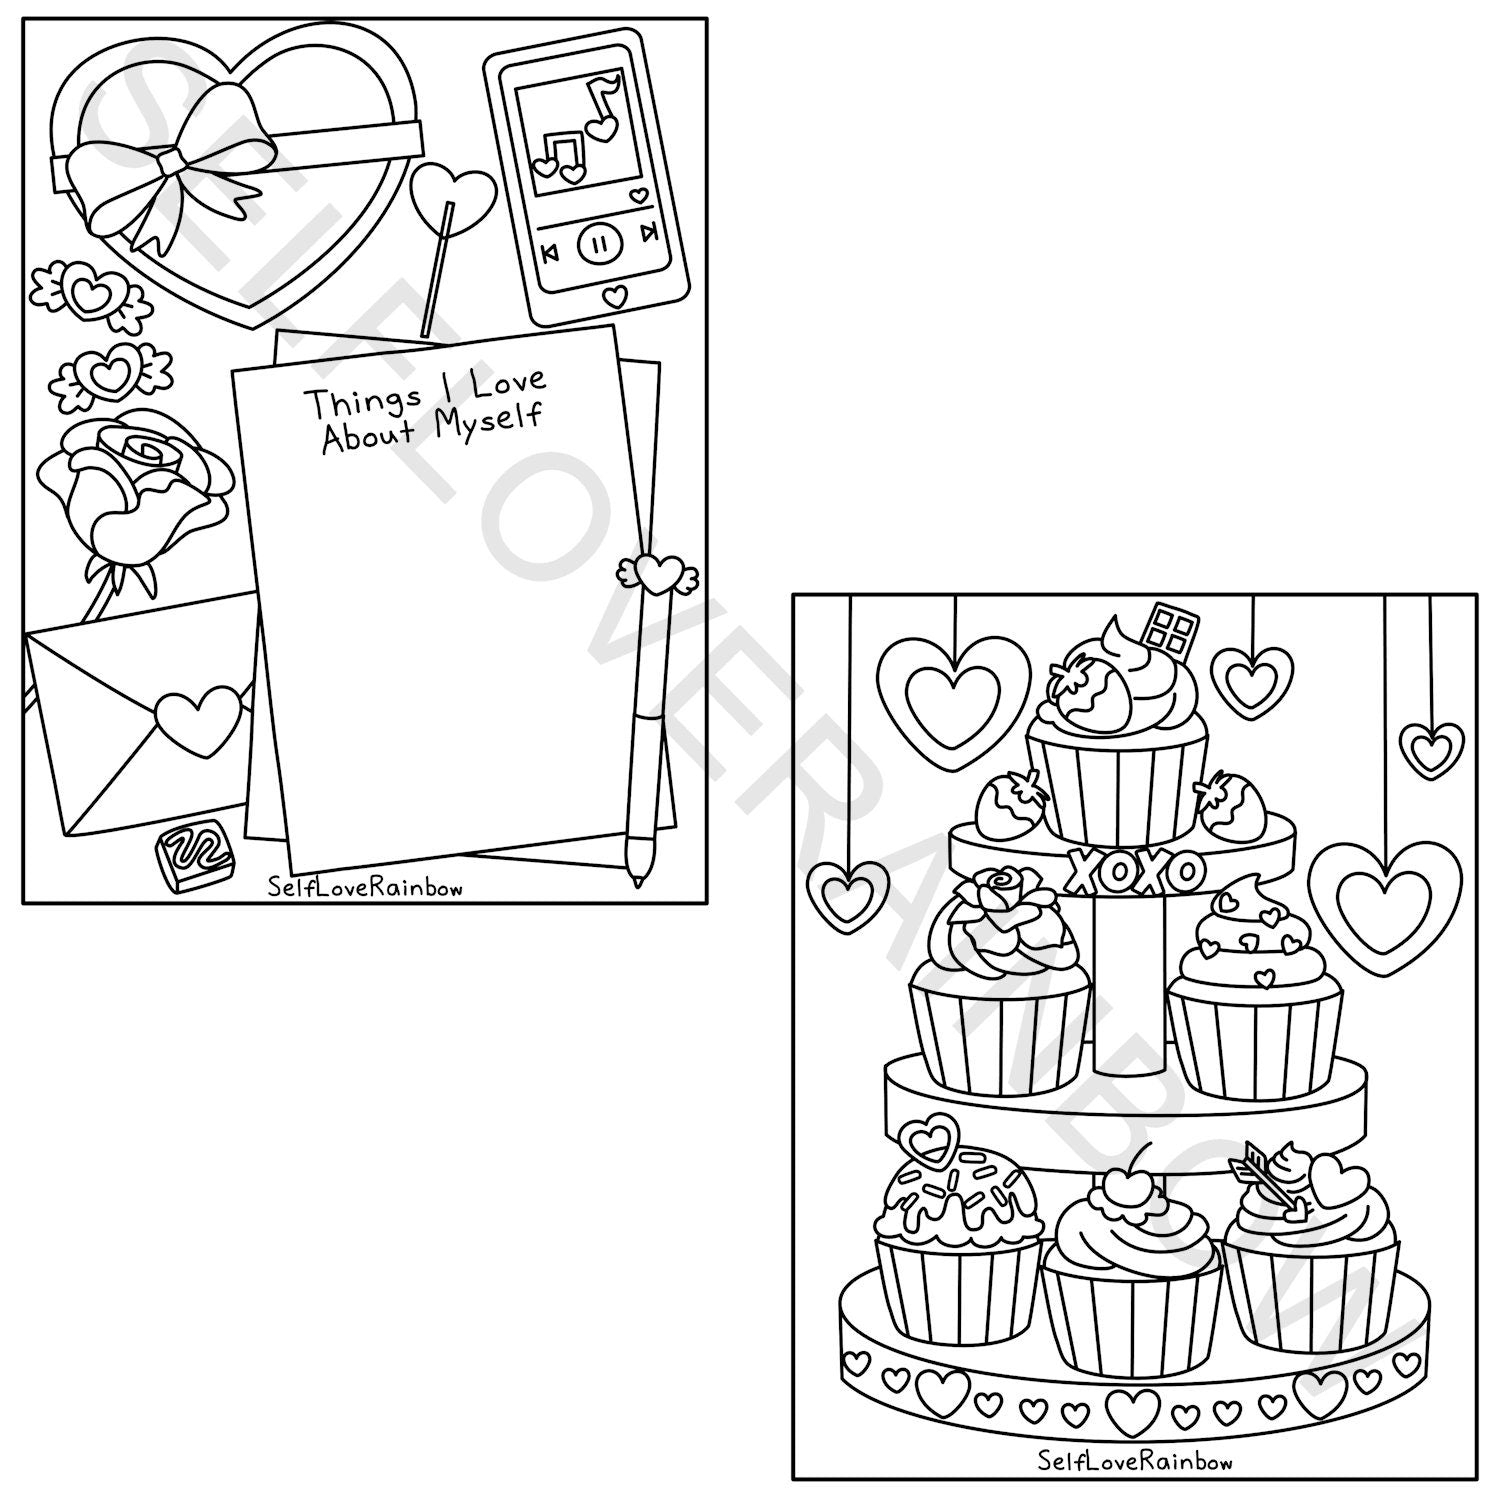 Self-Love Coloring Pages